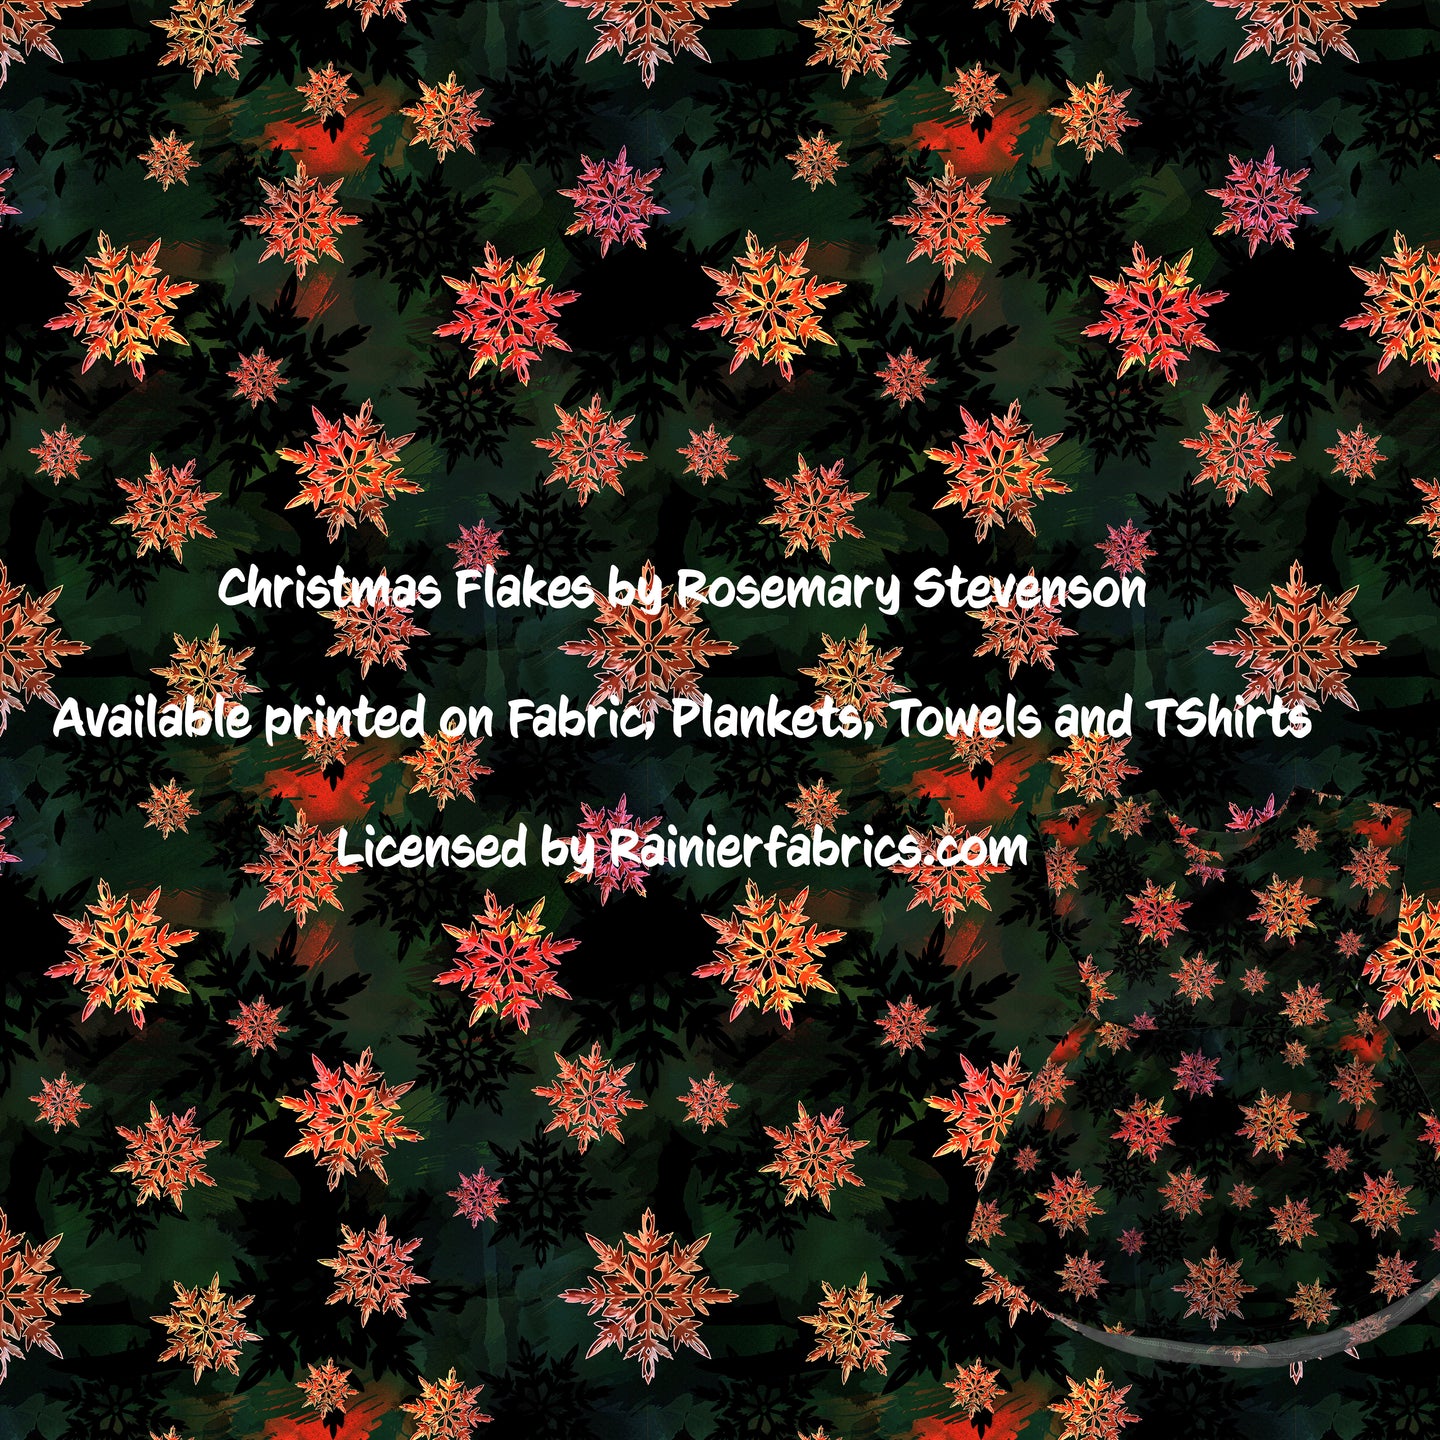 Christmas Flakes from Rosemary Stevenson  - 2-5 day turnaround - Order by 1/2 yard; Description of bases below